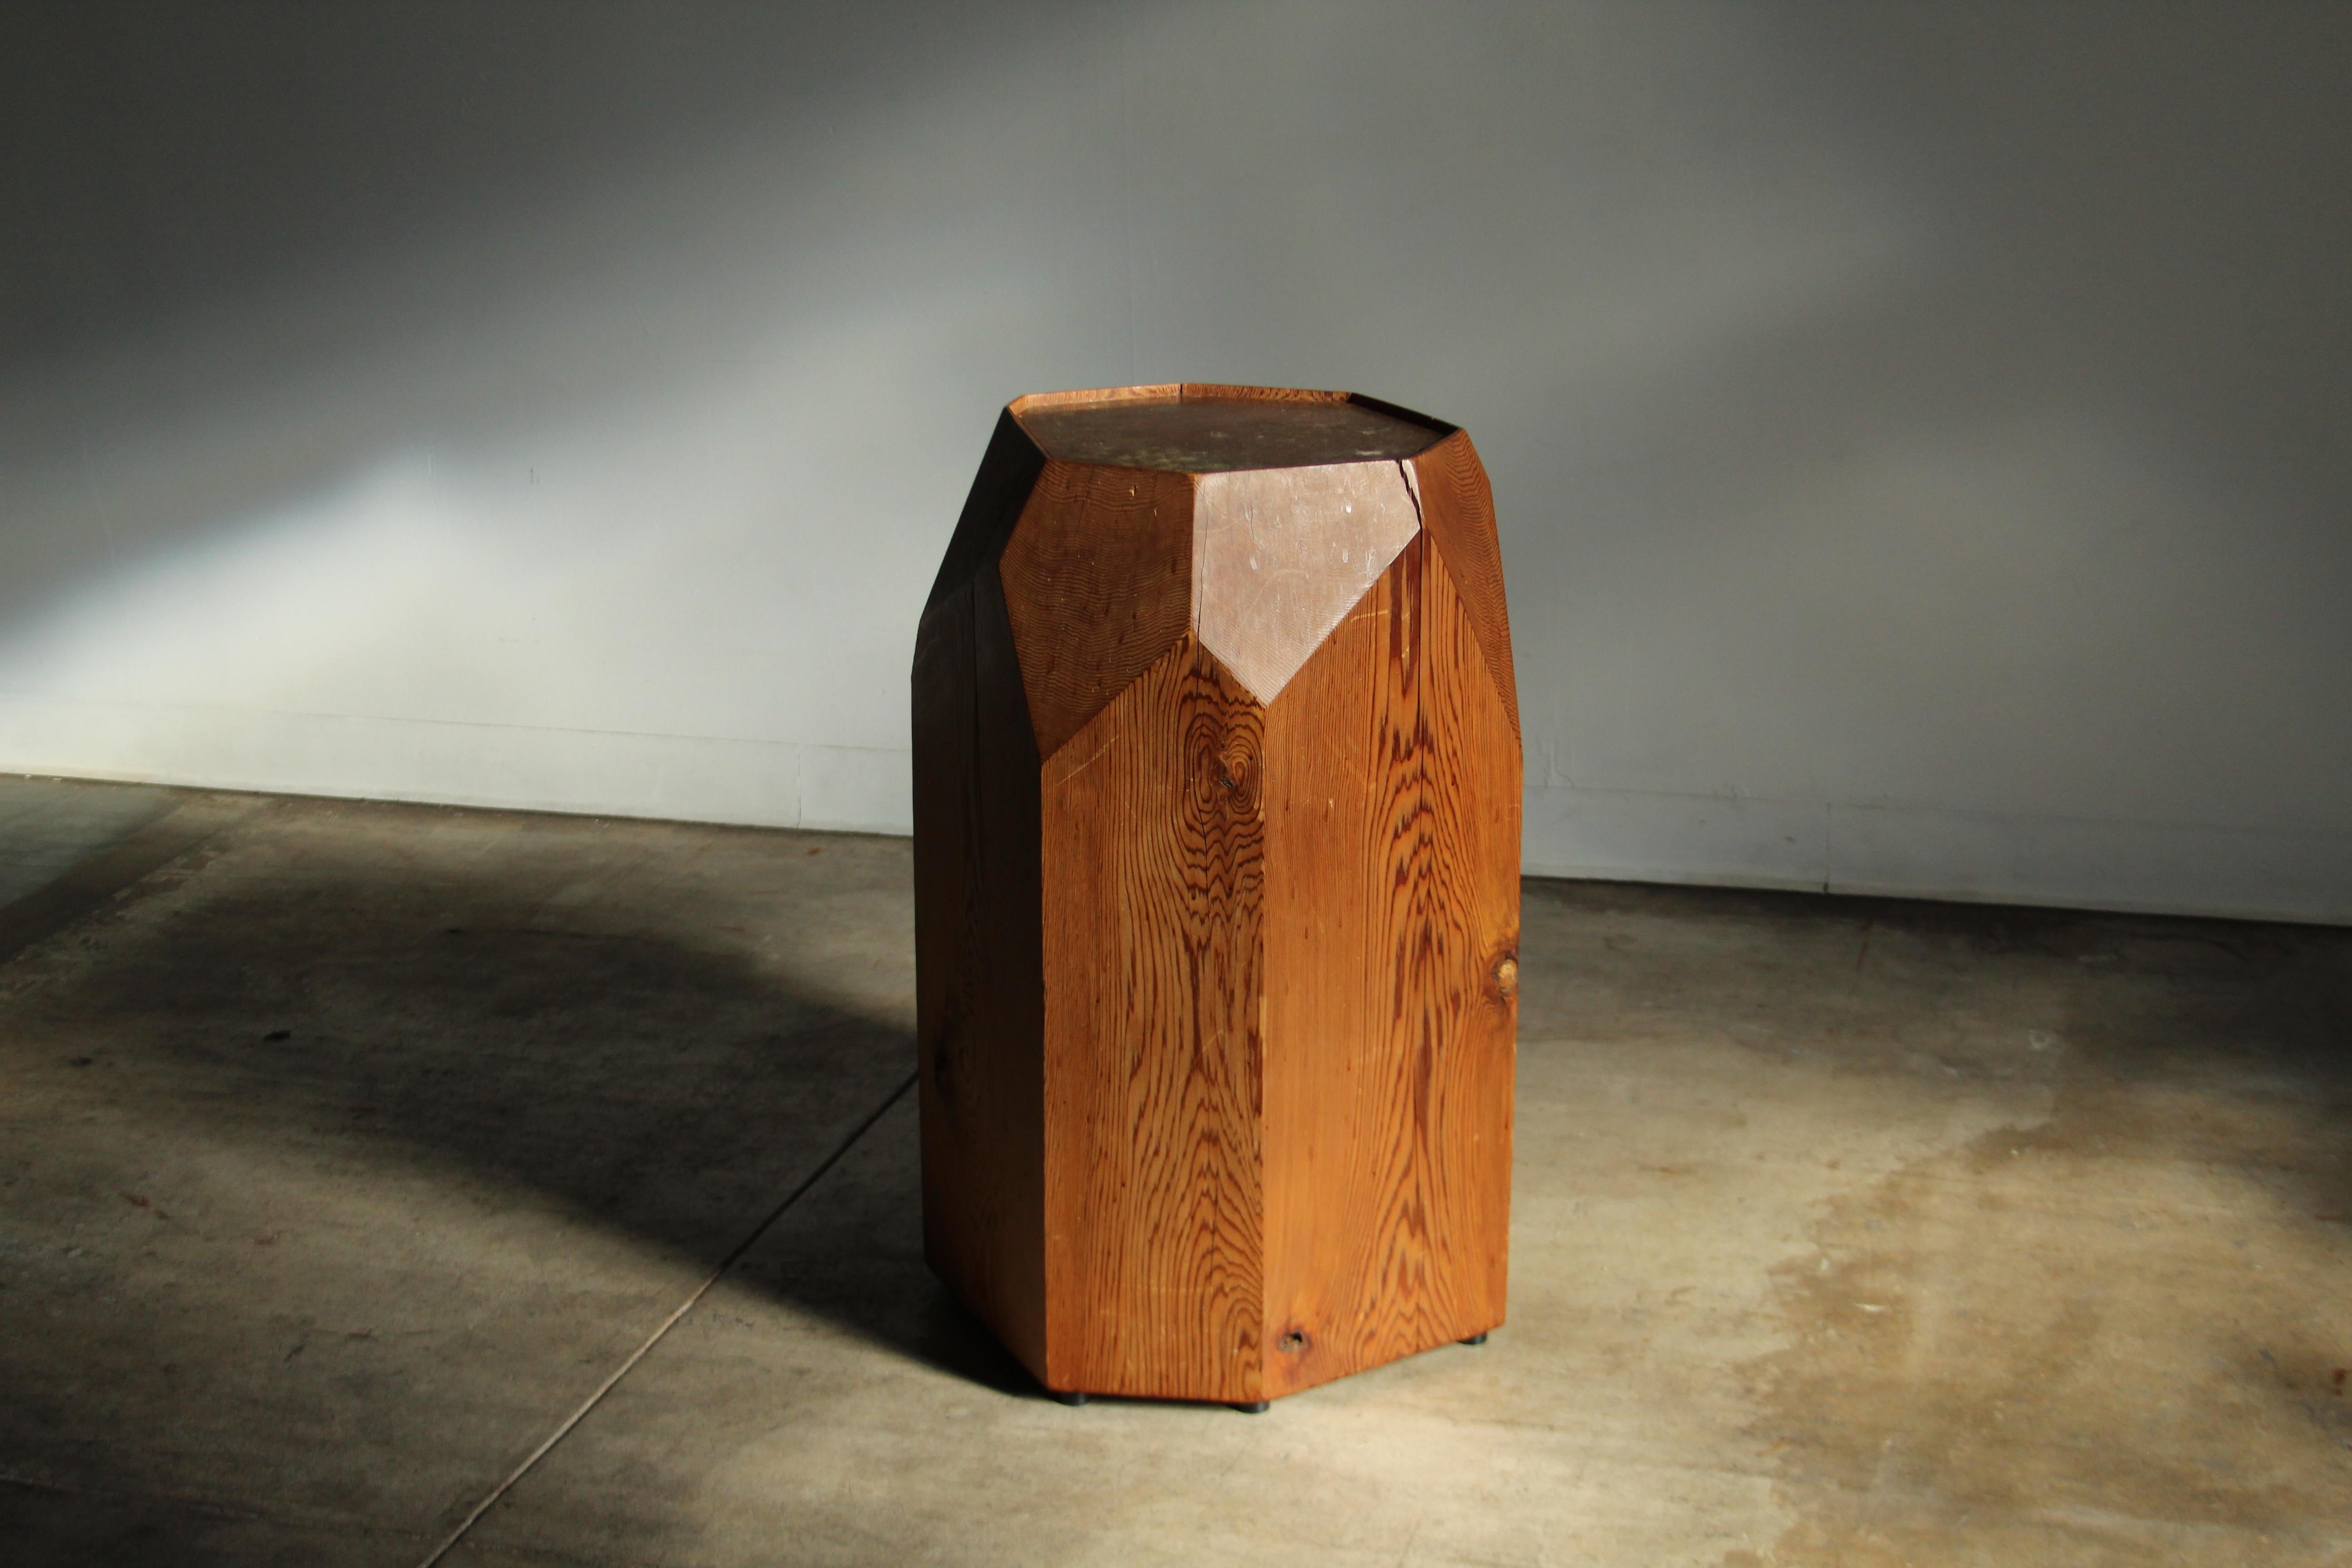 A large and incredible stump form pedestal in the manner of JB Blunk. Organic, minimalist form with thoughtful angular cuts, which turn this piece into a sculpture of its own. The reddish hue of the California pine radiates warmth, and the smooth